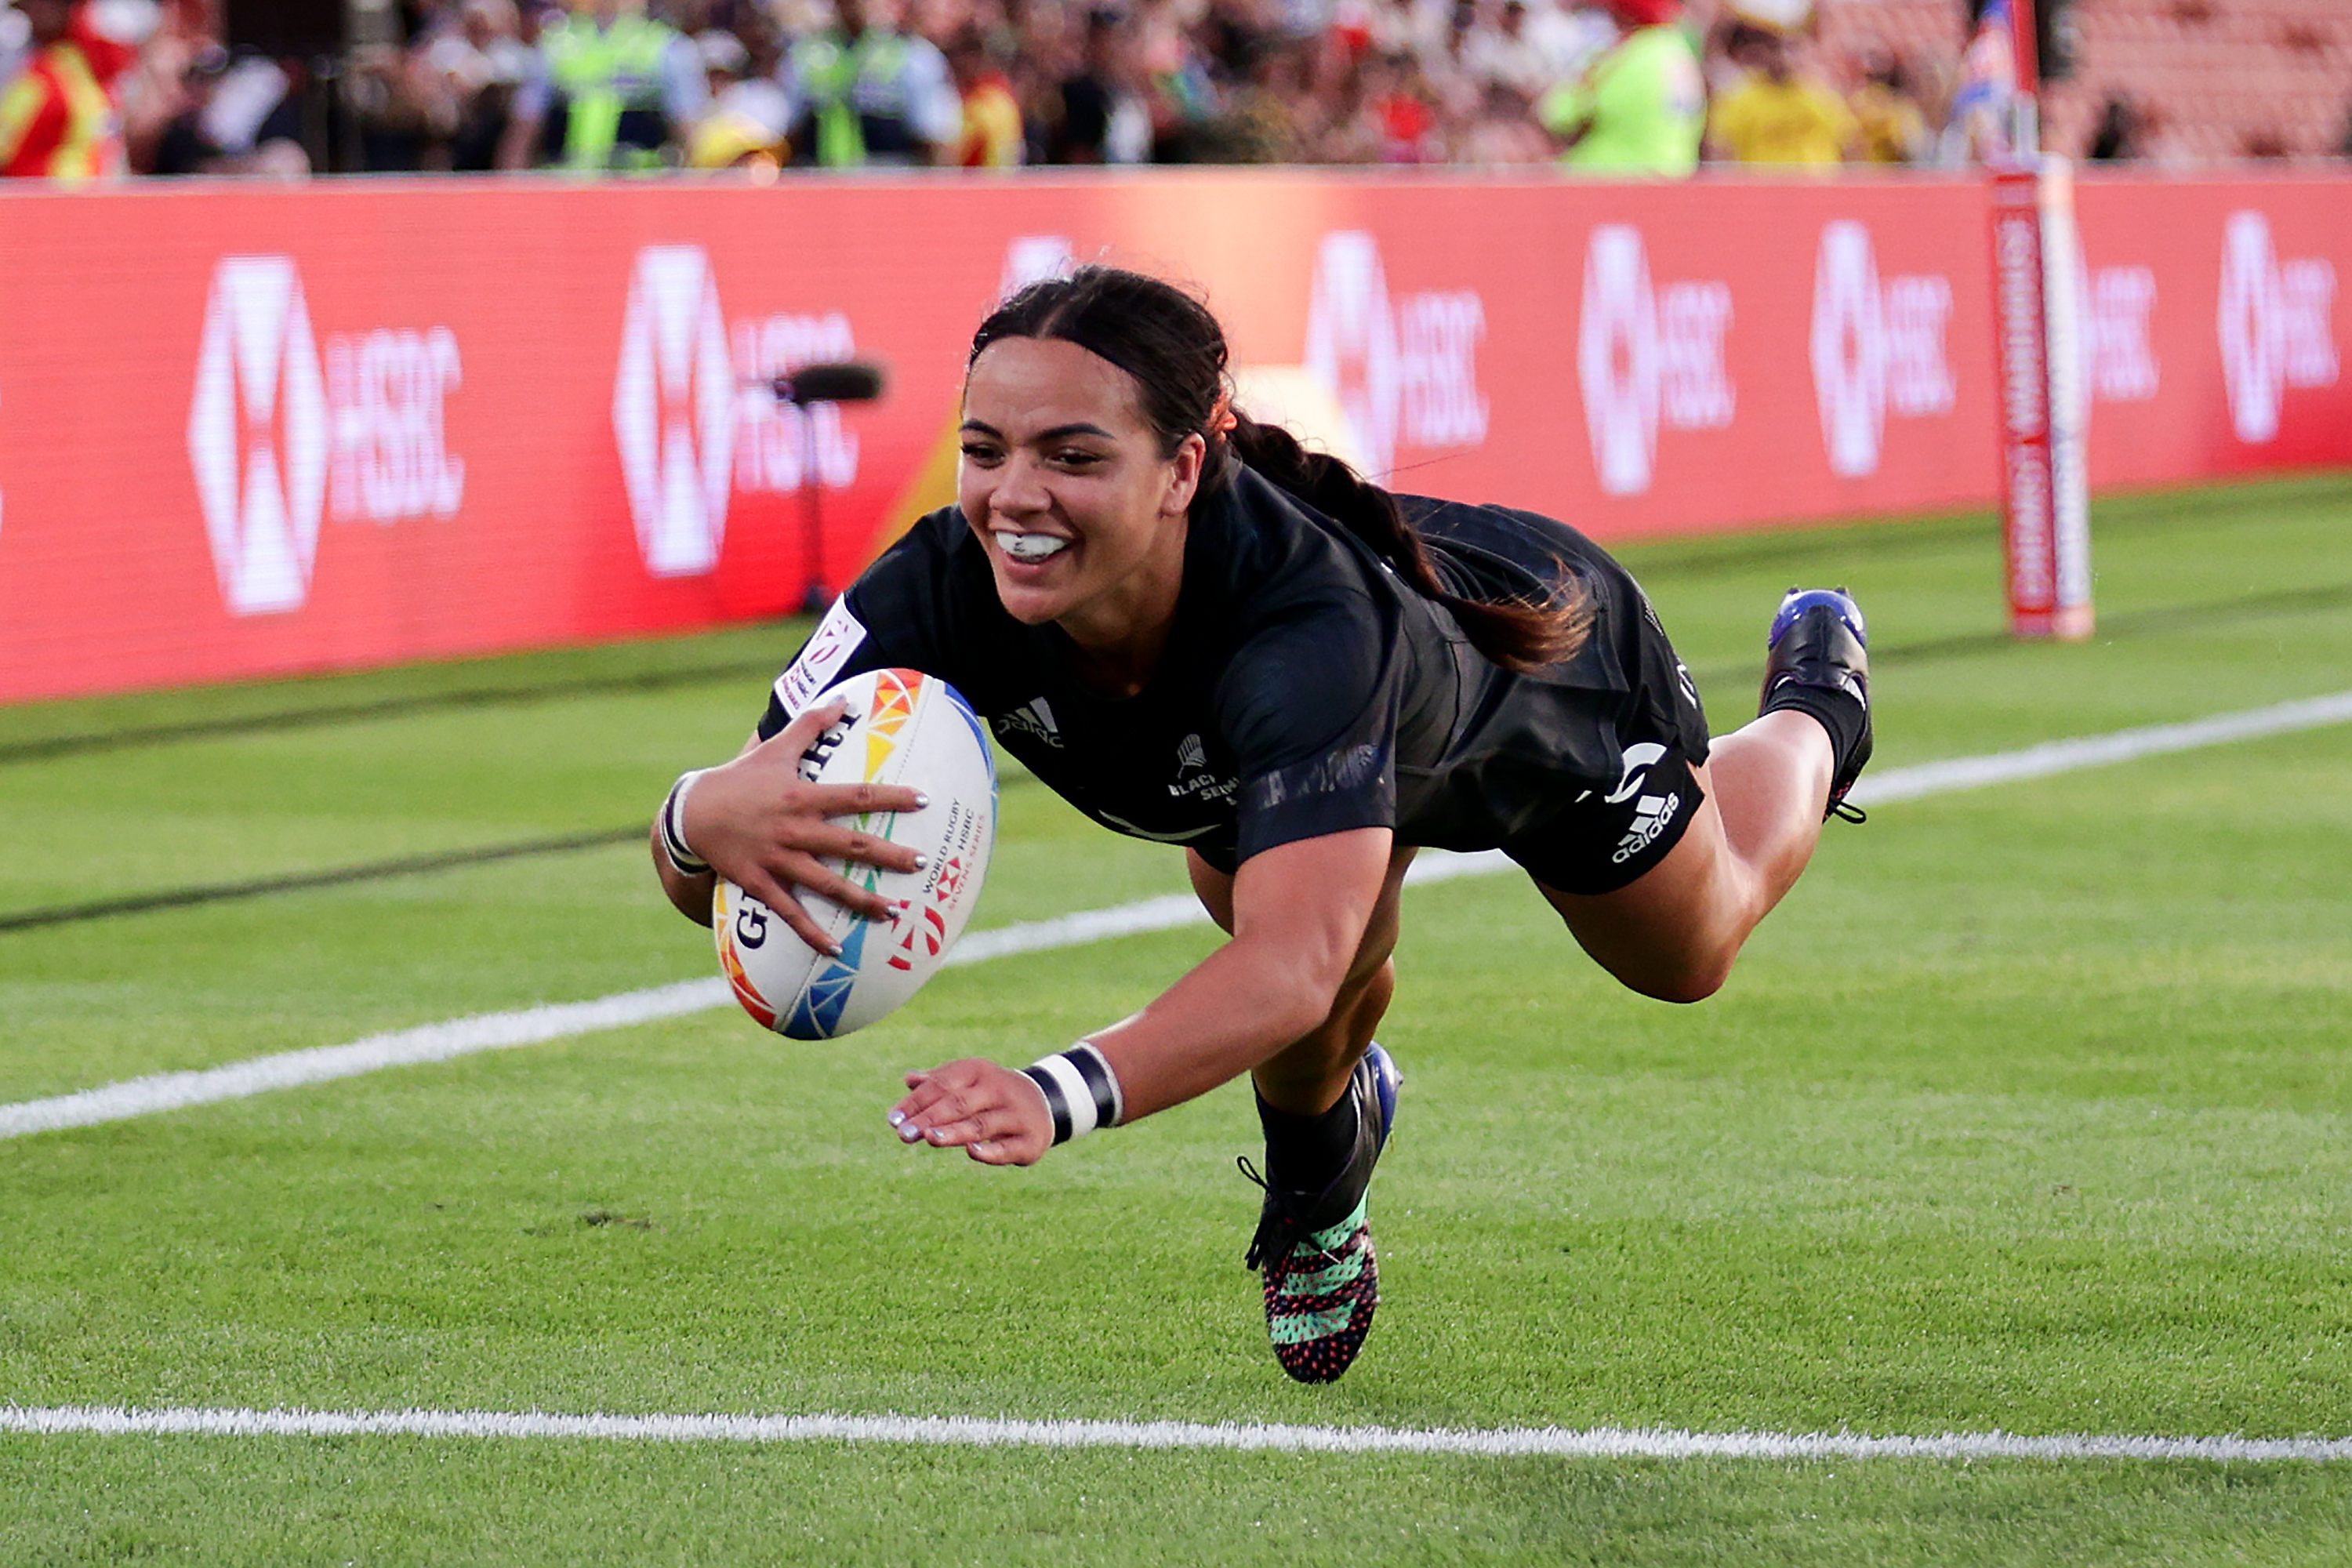 Sevens players to take part in Premier Rugby Sevens » allblacks